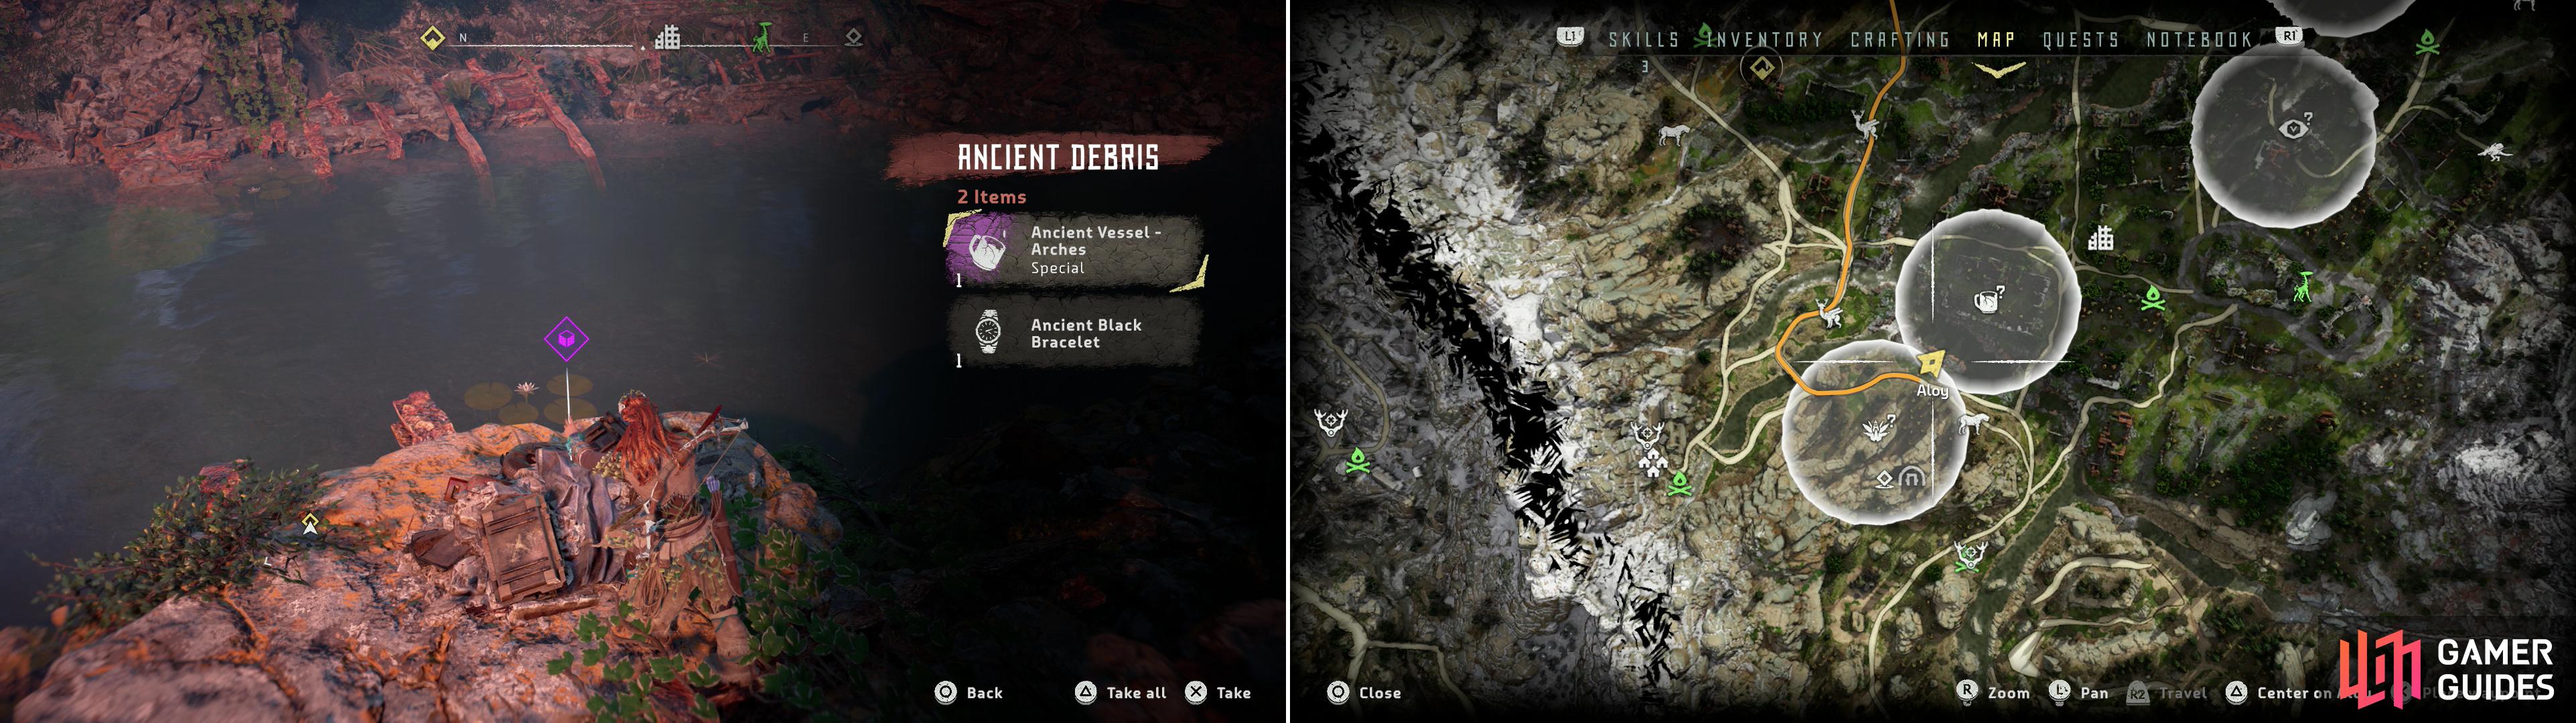 Search a pile of Ancient Debris to find the Ancient Vessel - Arches (left) at the location indicated on the map (right).